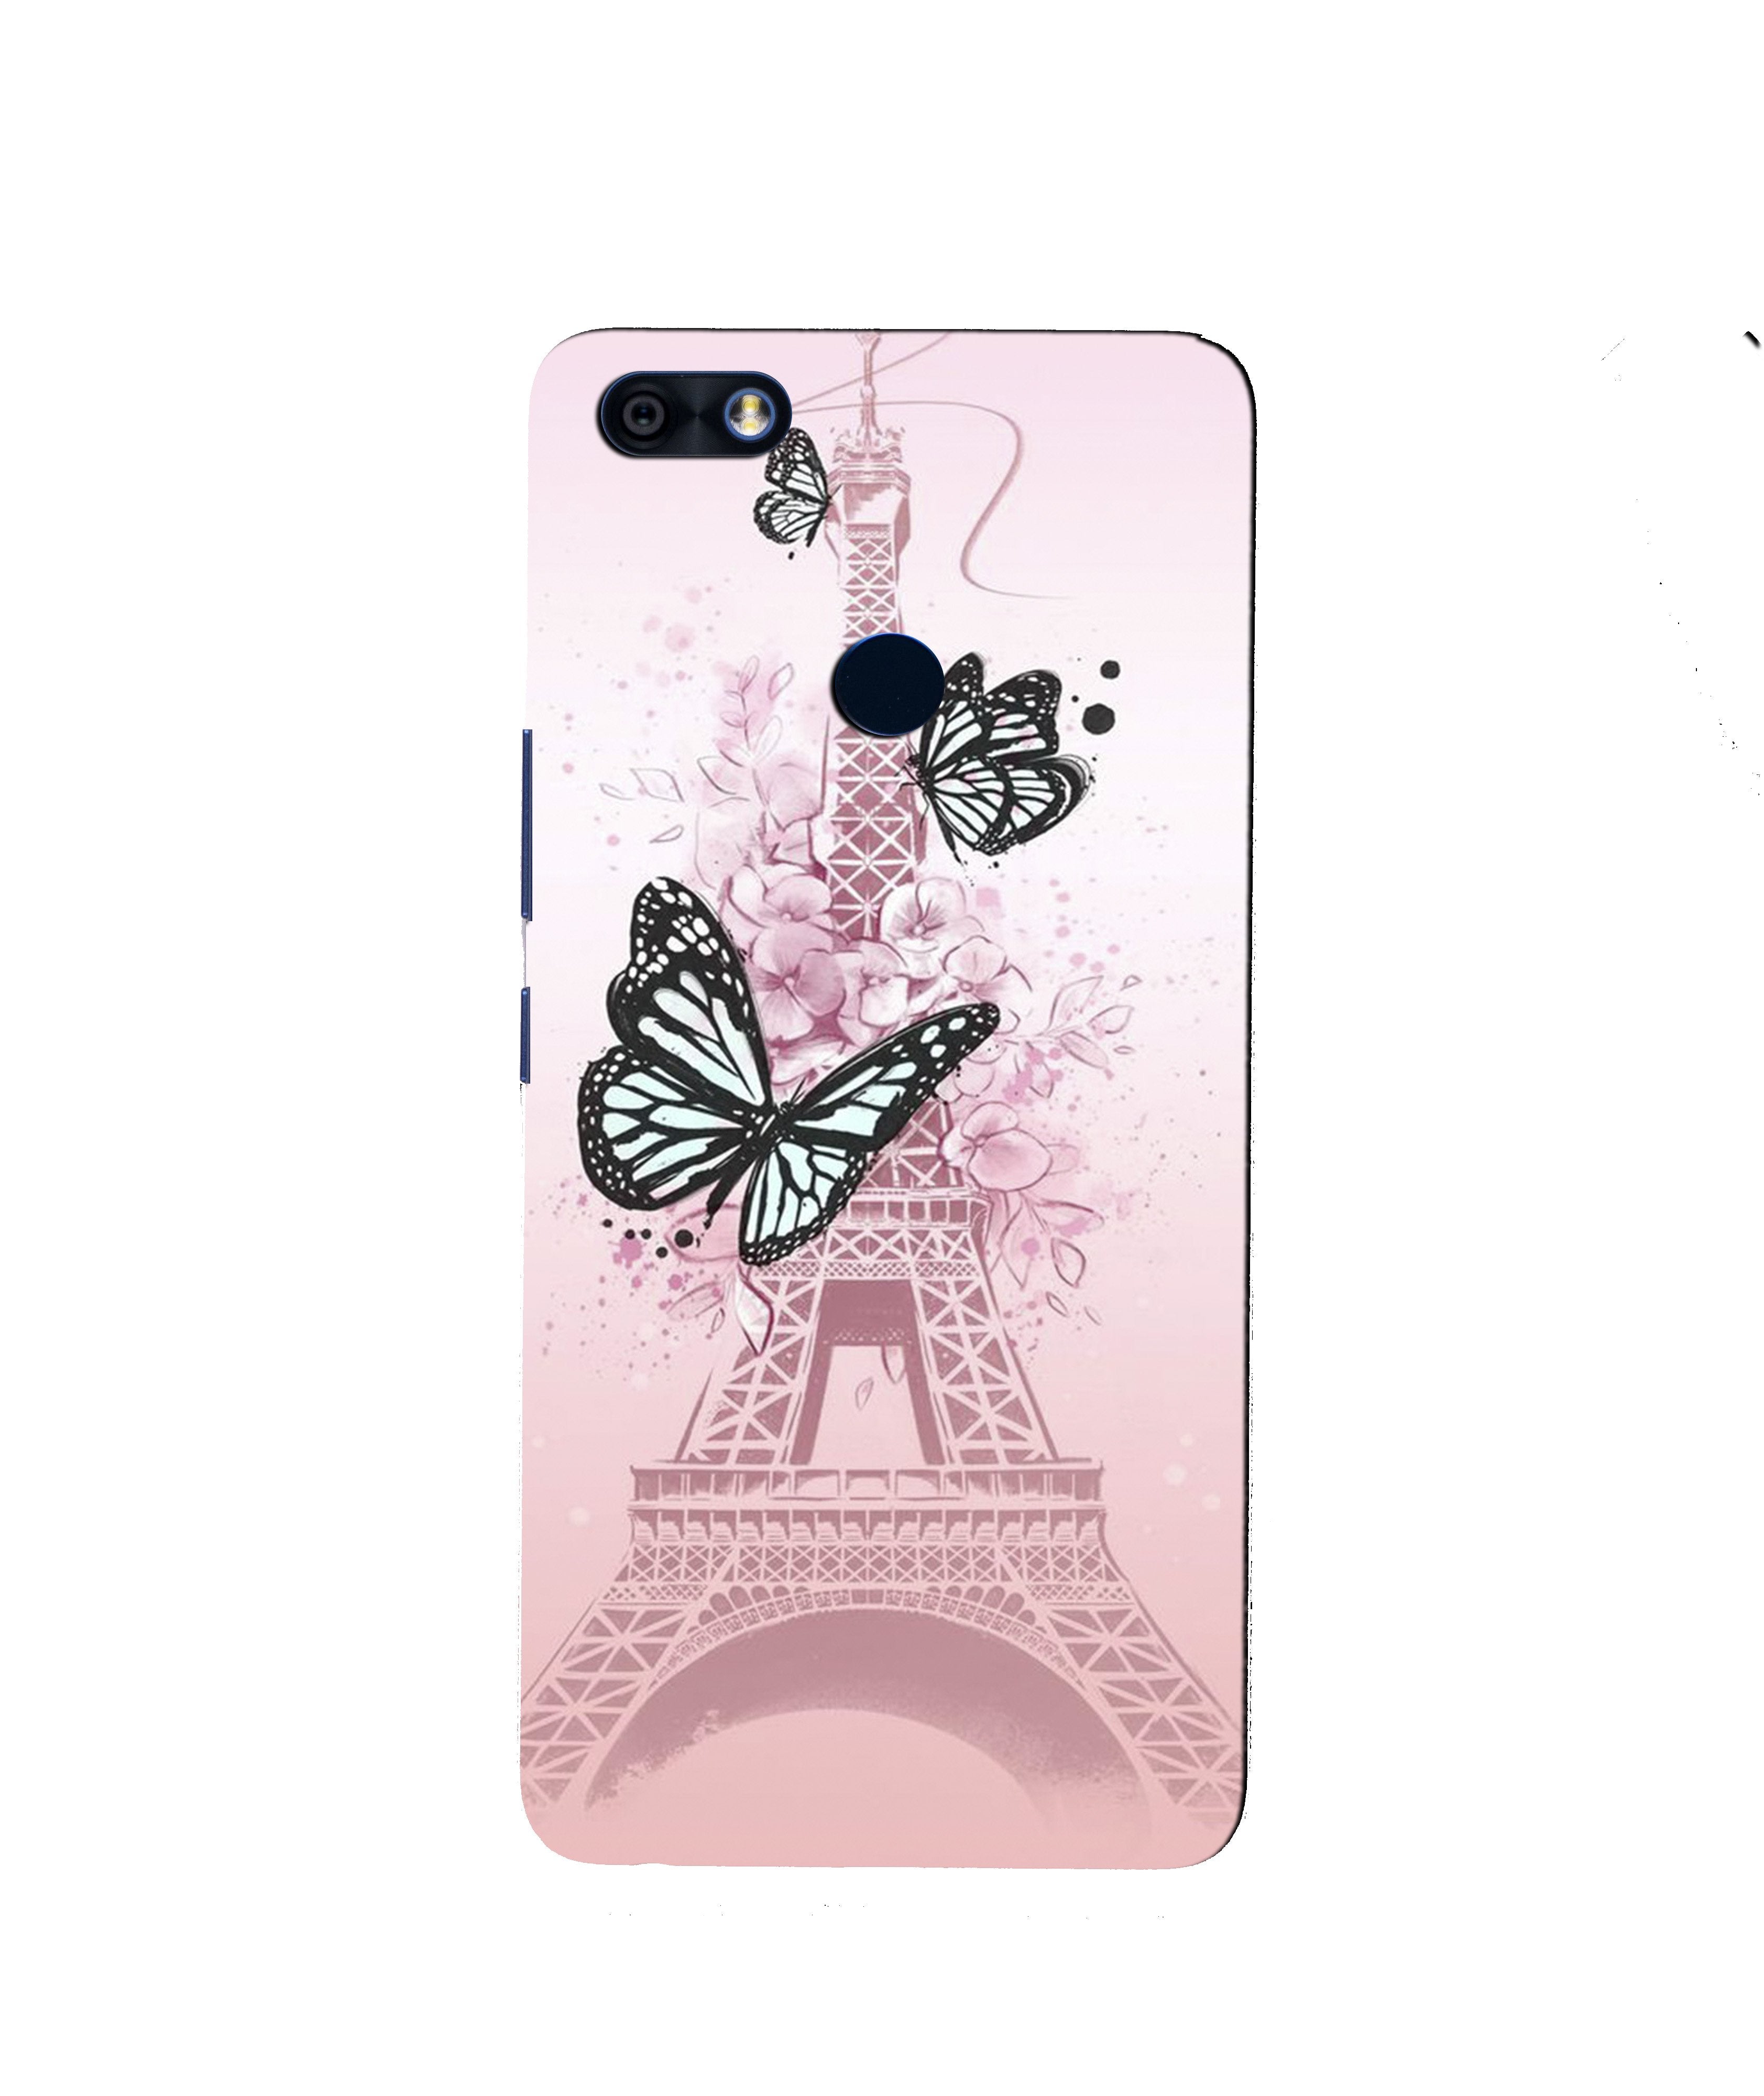 Eiffel Tower Case for Infinix Note 5 / Note 5 Pro (Design No. 211)